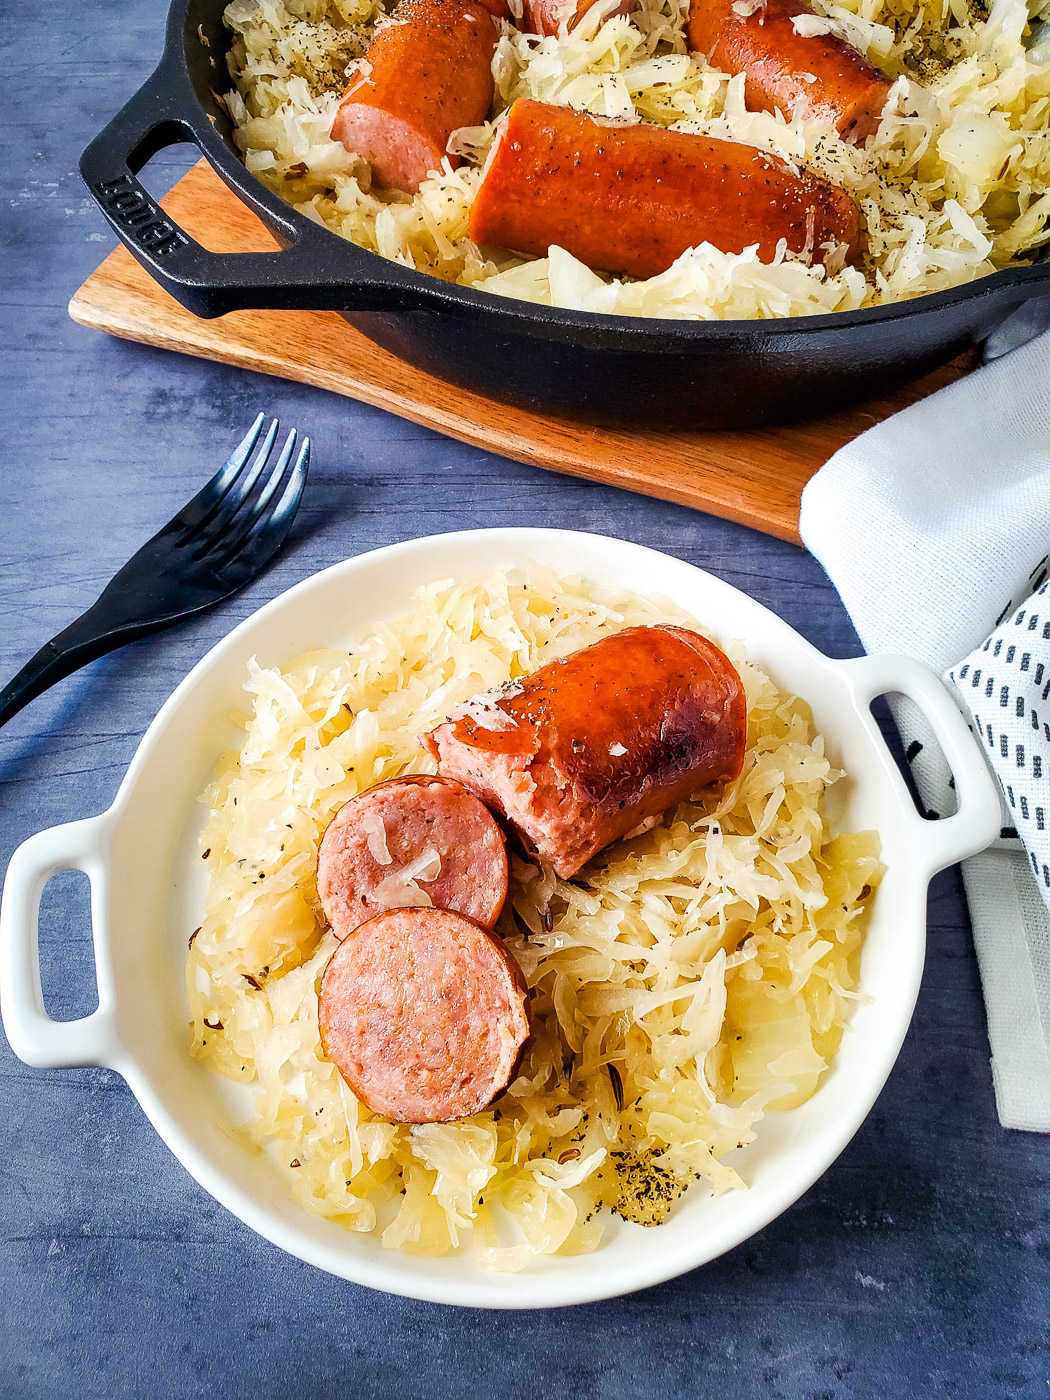 serving dish with sauerkraut and sausage near a cast iron skillet